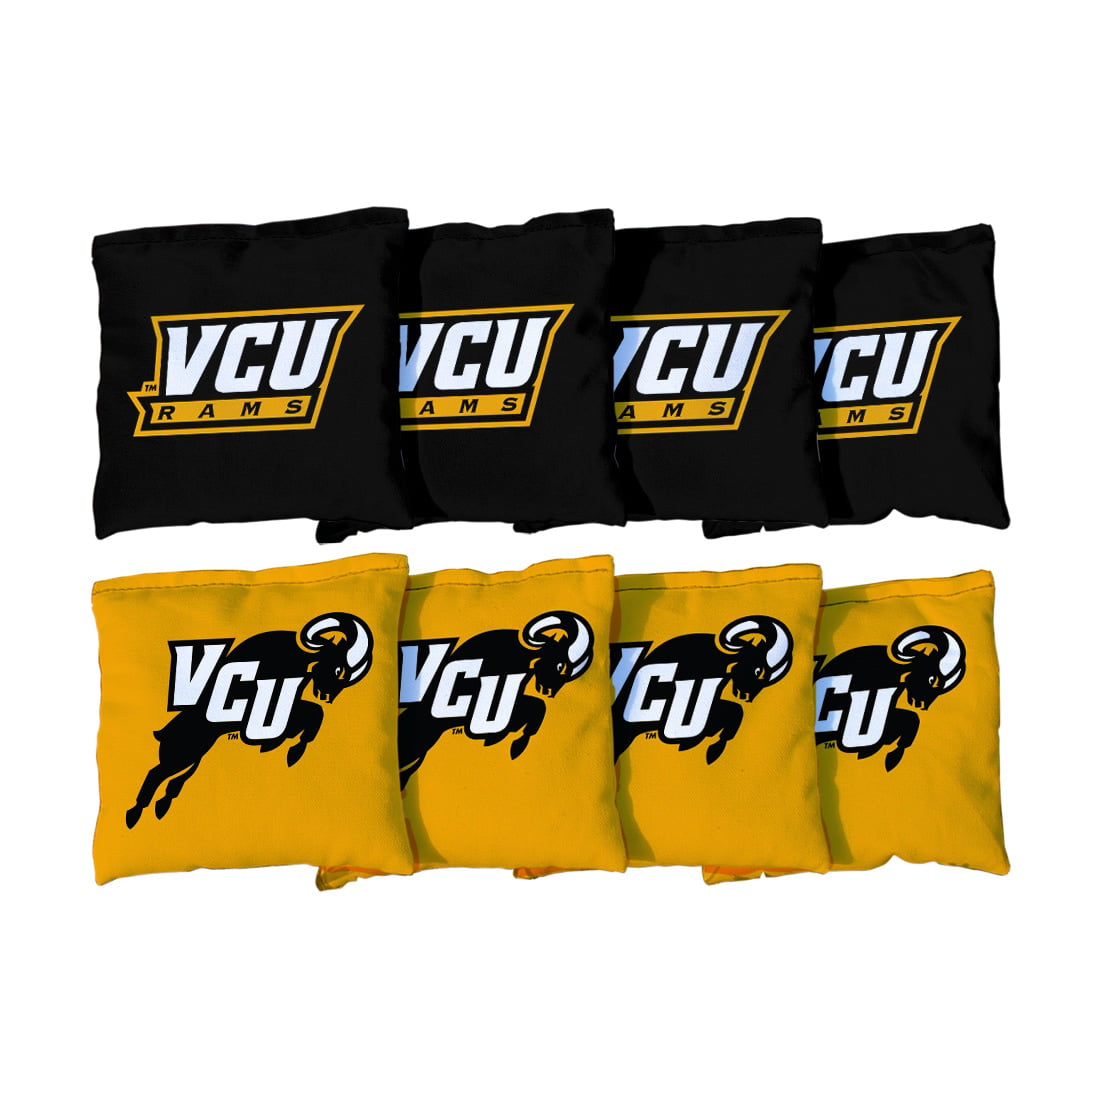 Victory Tailgate NCAA Collegiate Regulation Cornhole Game Bag Set 8 Bags Included, Corn-Filled Virginia Commonwealth Rams 